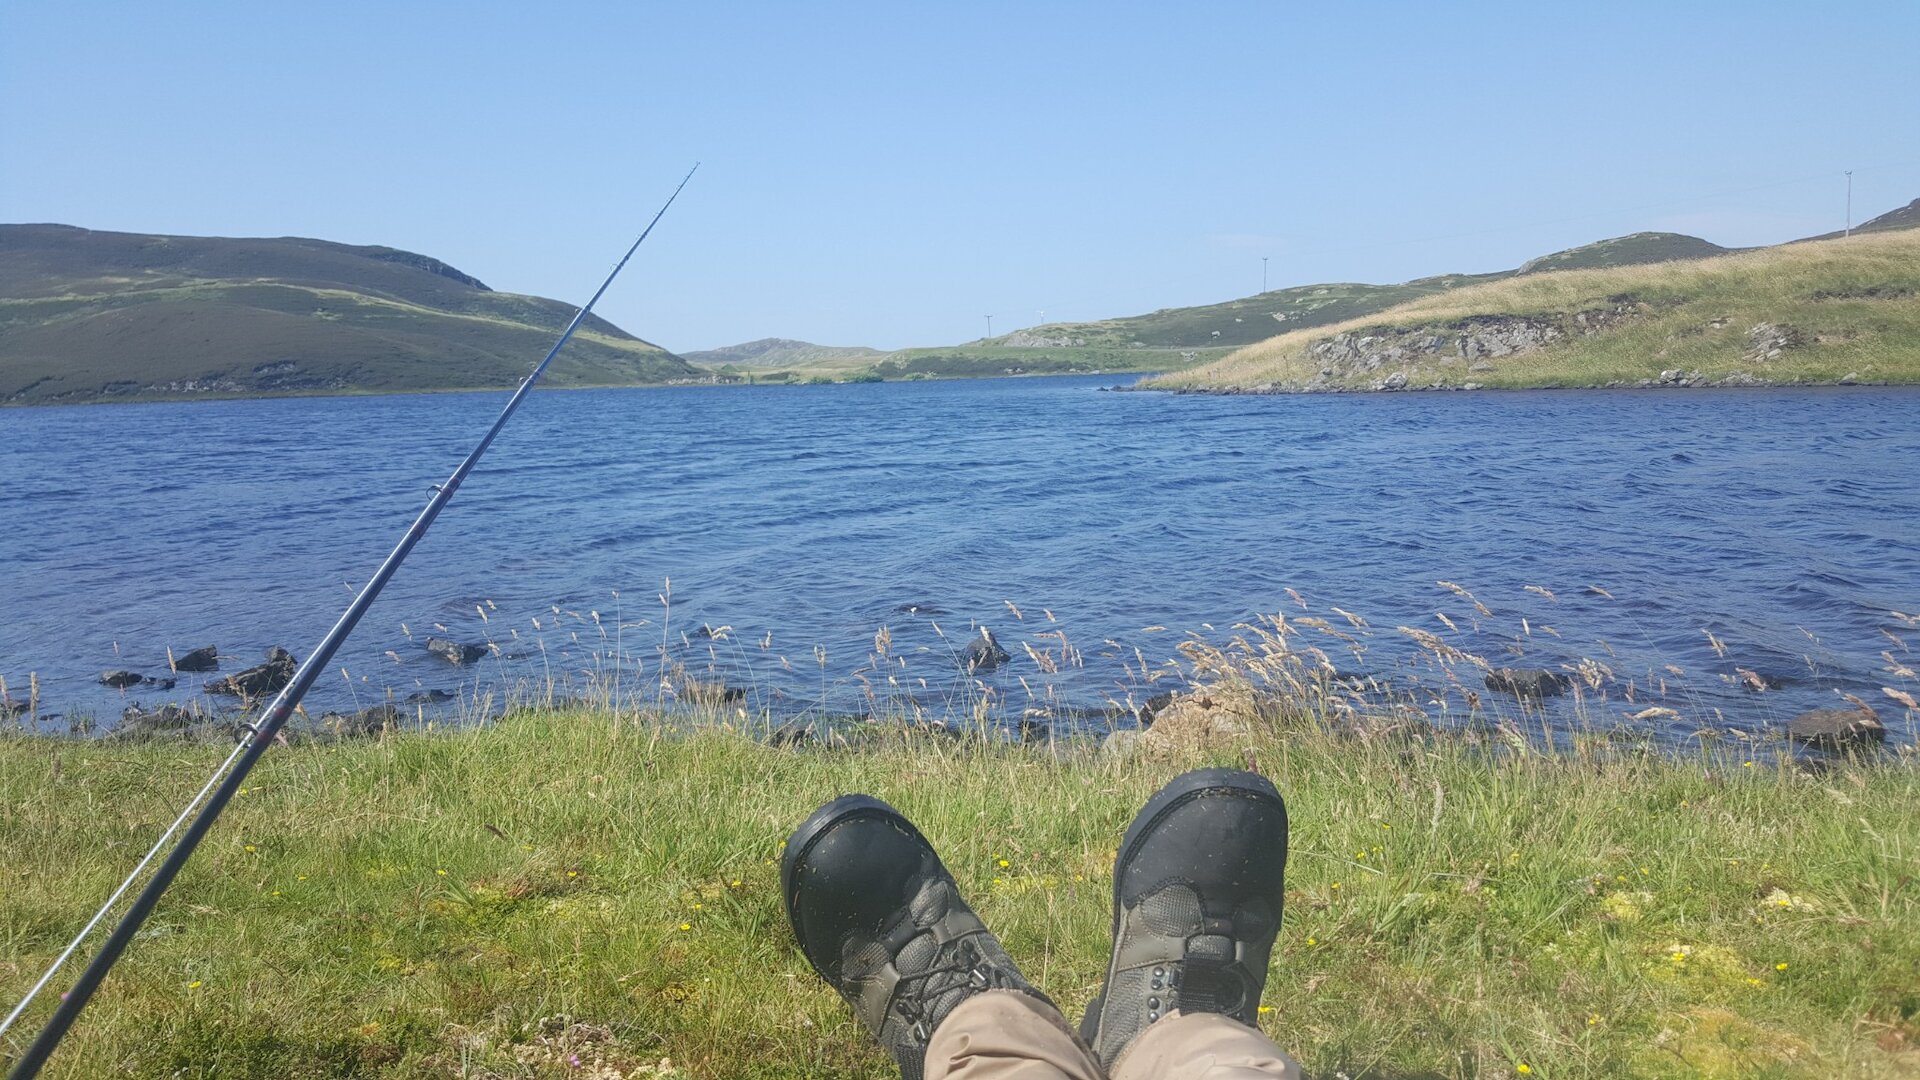 Getting away from it all with a spot of trout fishing.